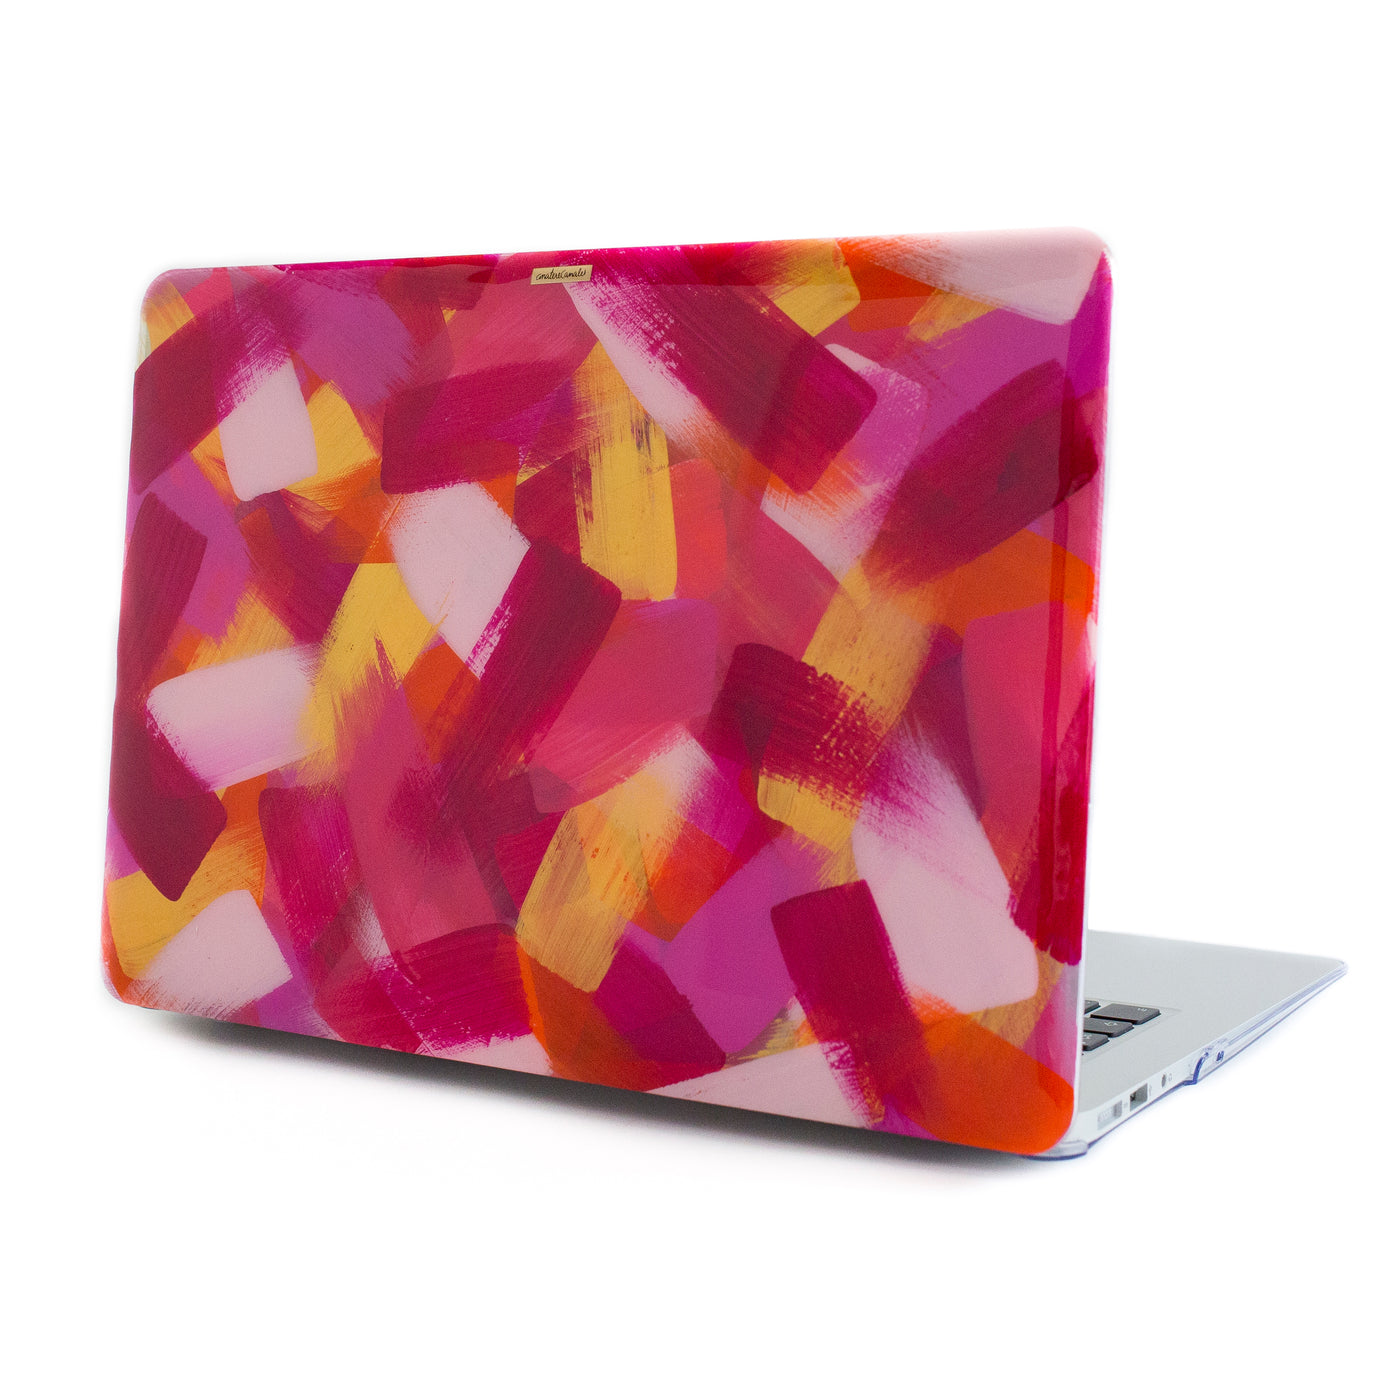 Sunkissed Signature Strokes Macbook - Ana Tere Canales